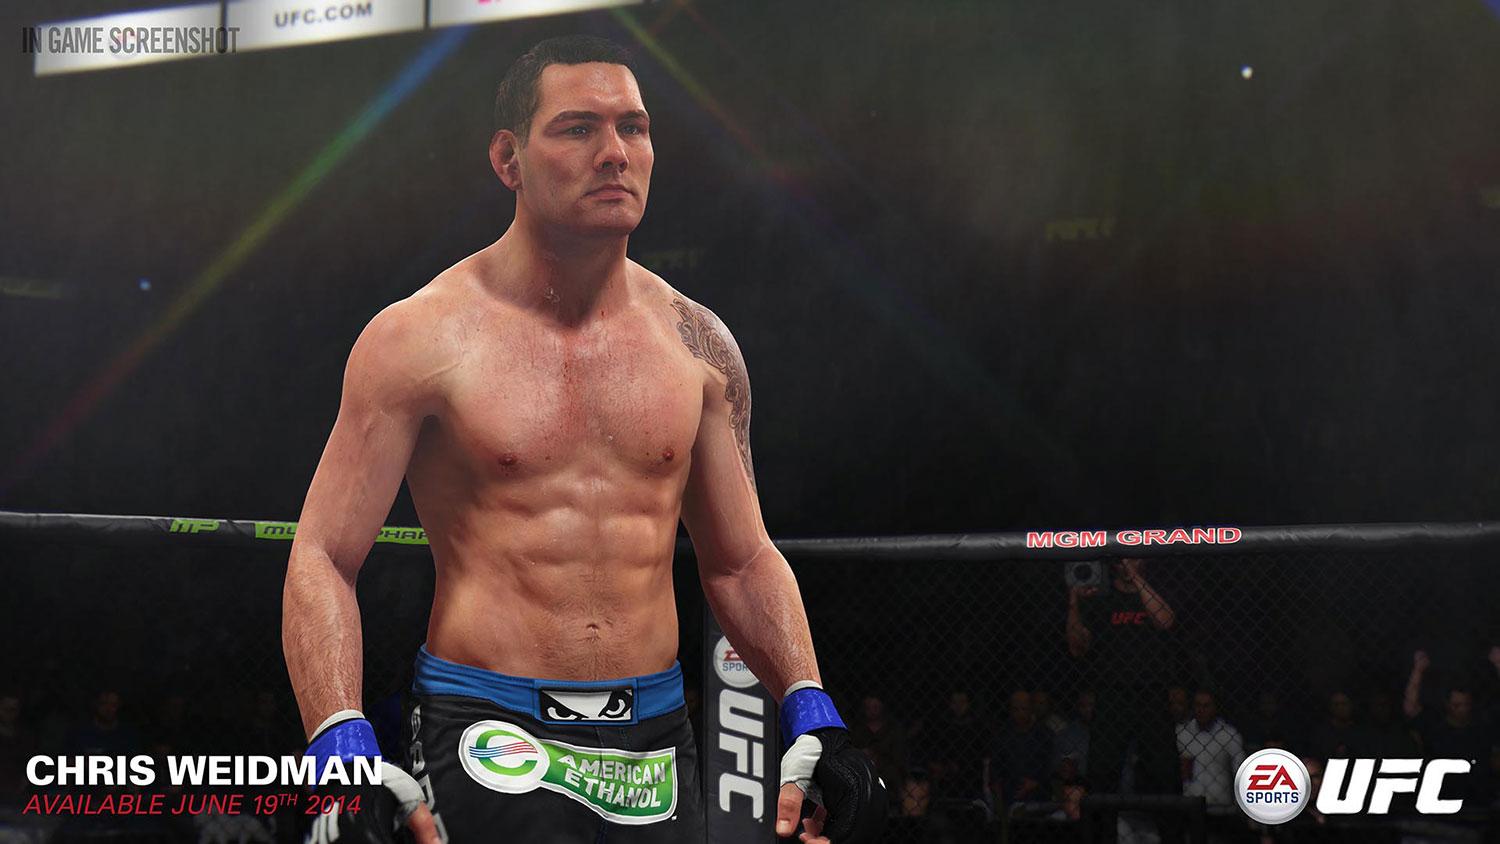 UFC 5 New Features: Every new gameplay feature in EA's next fighter game